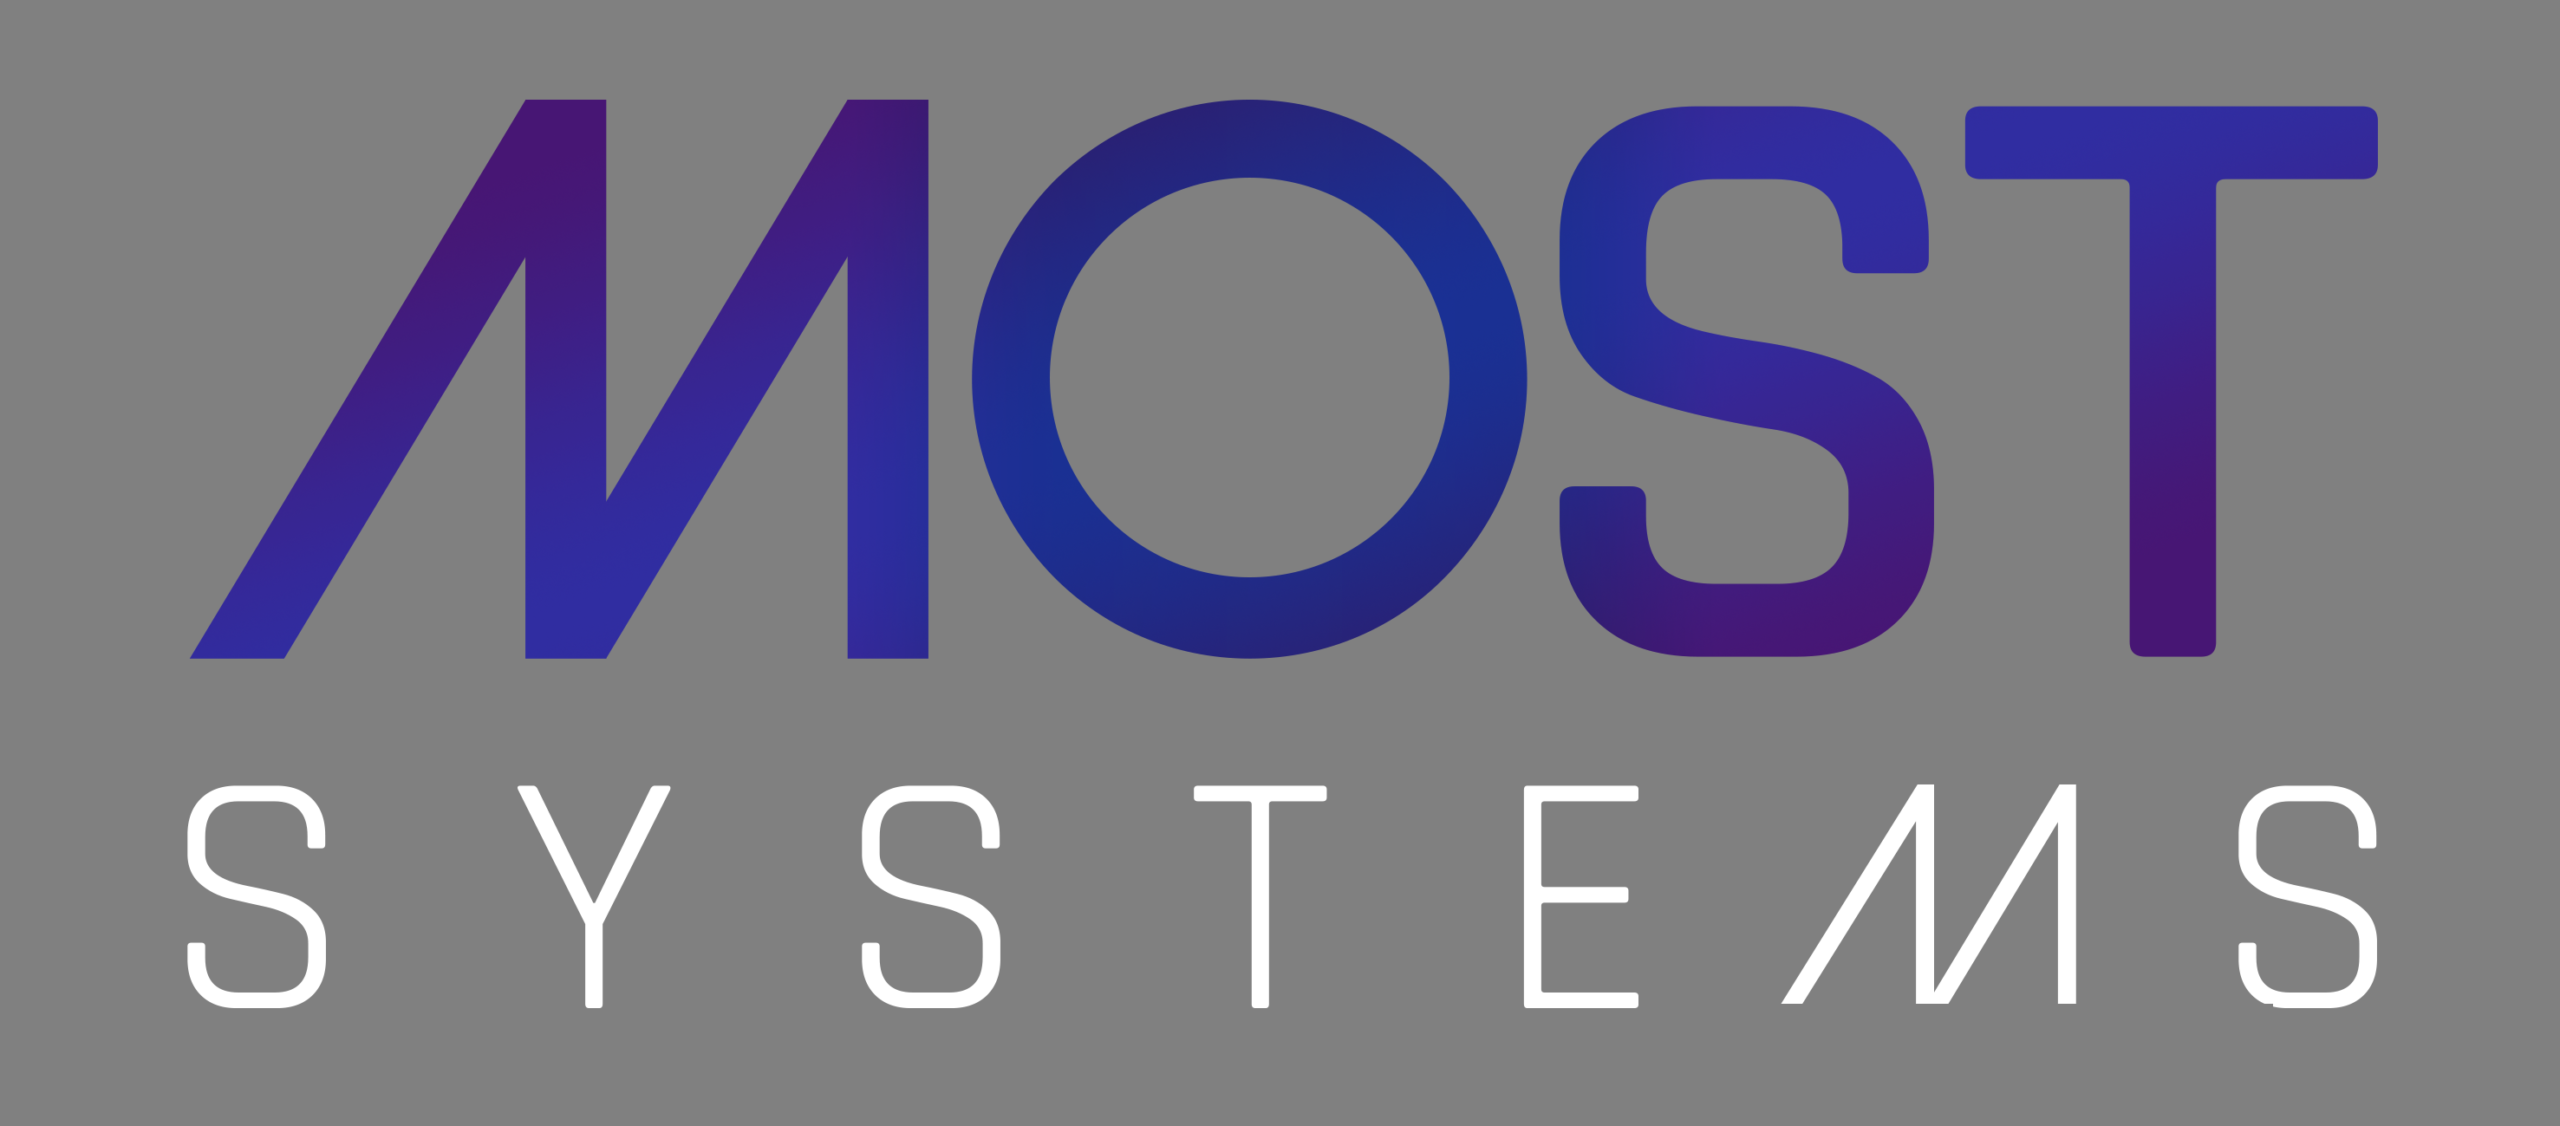 MOST SYSTEMS logo